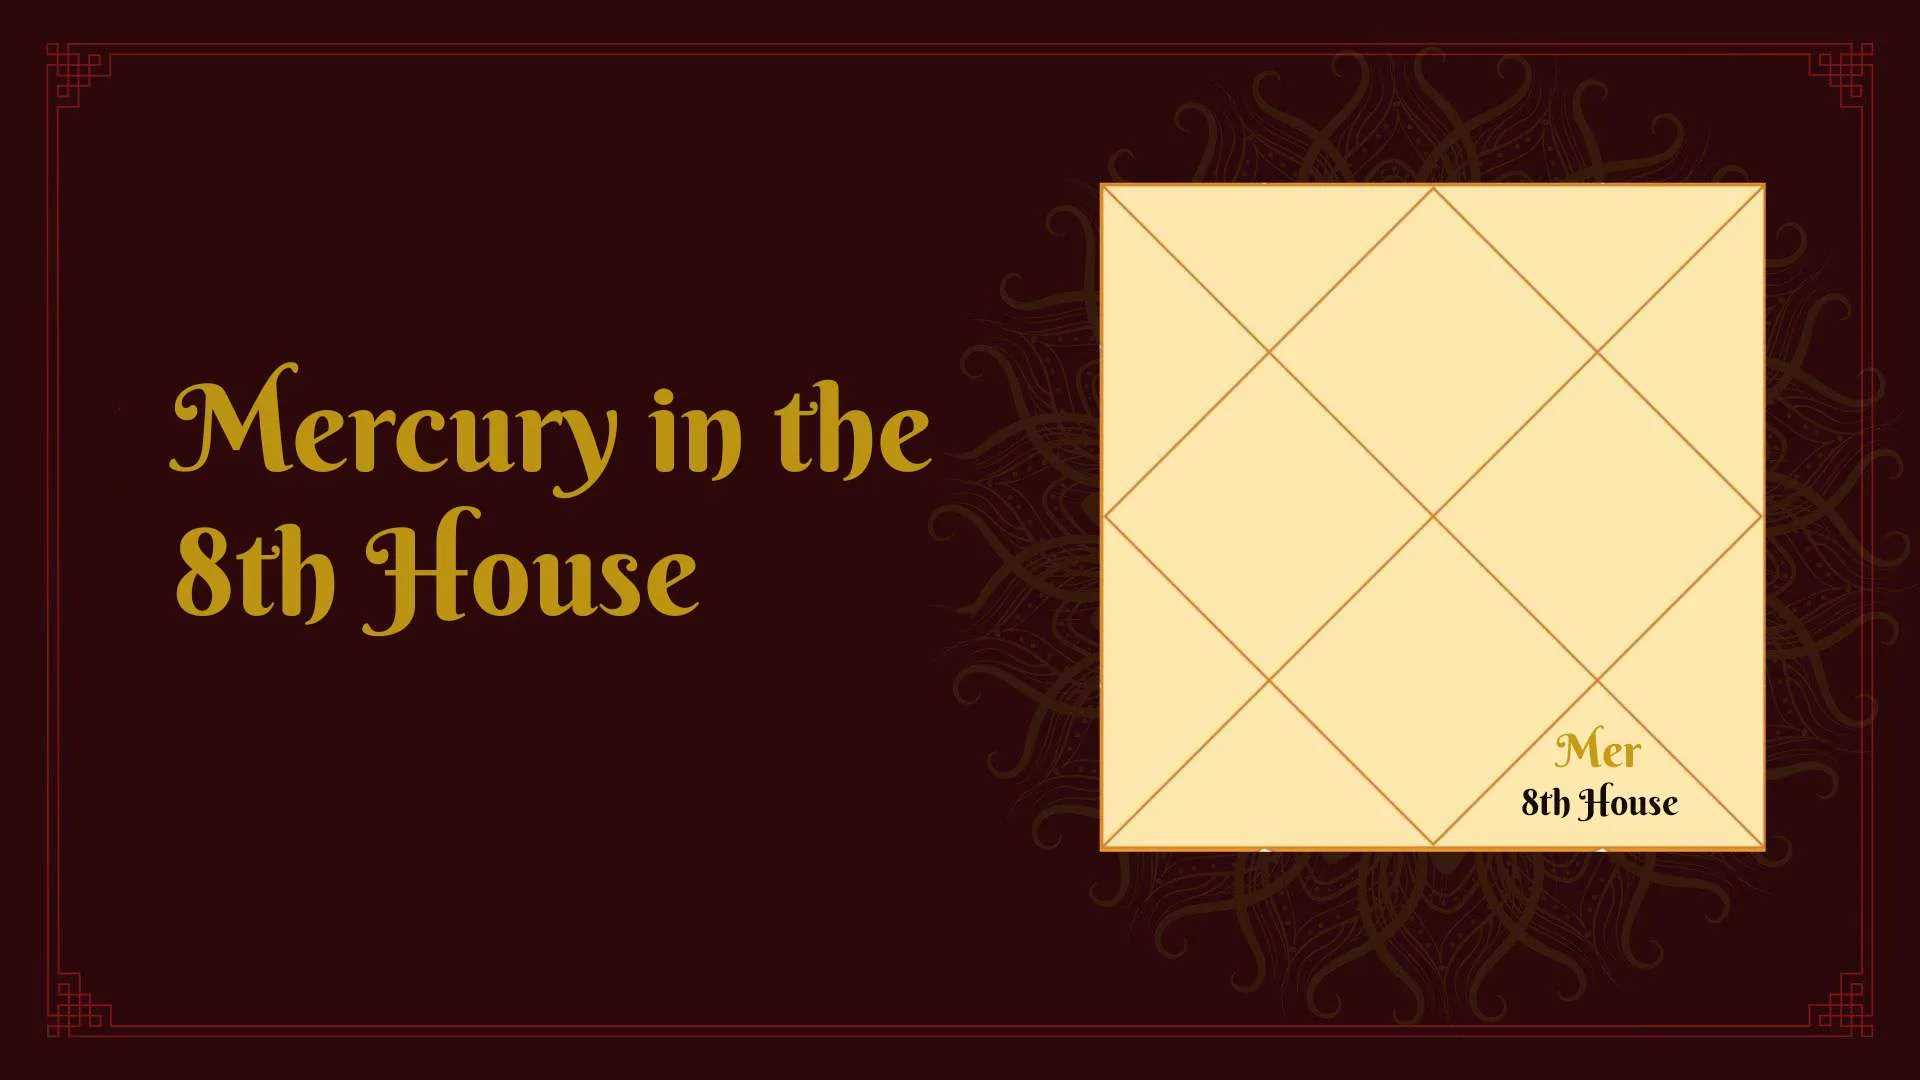 Effects of Mercury in the 8th house